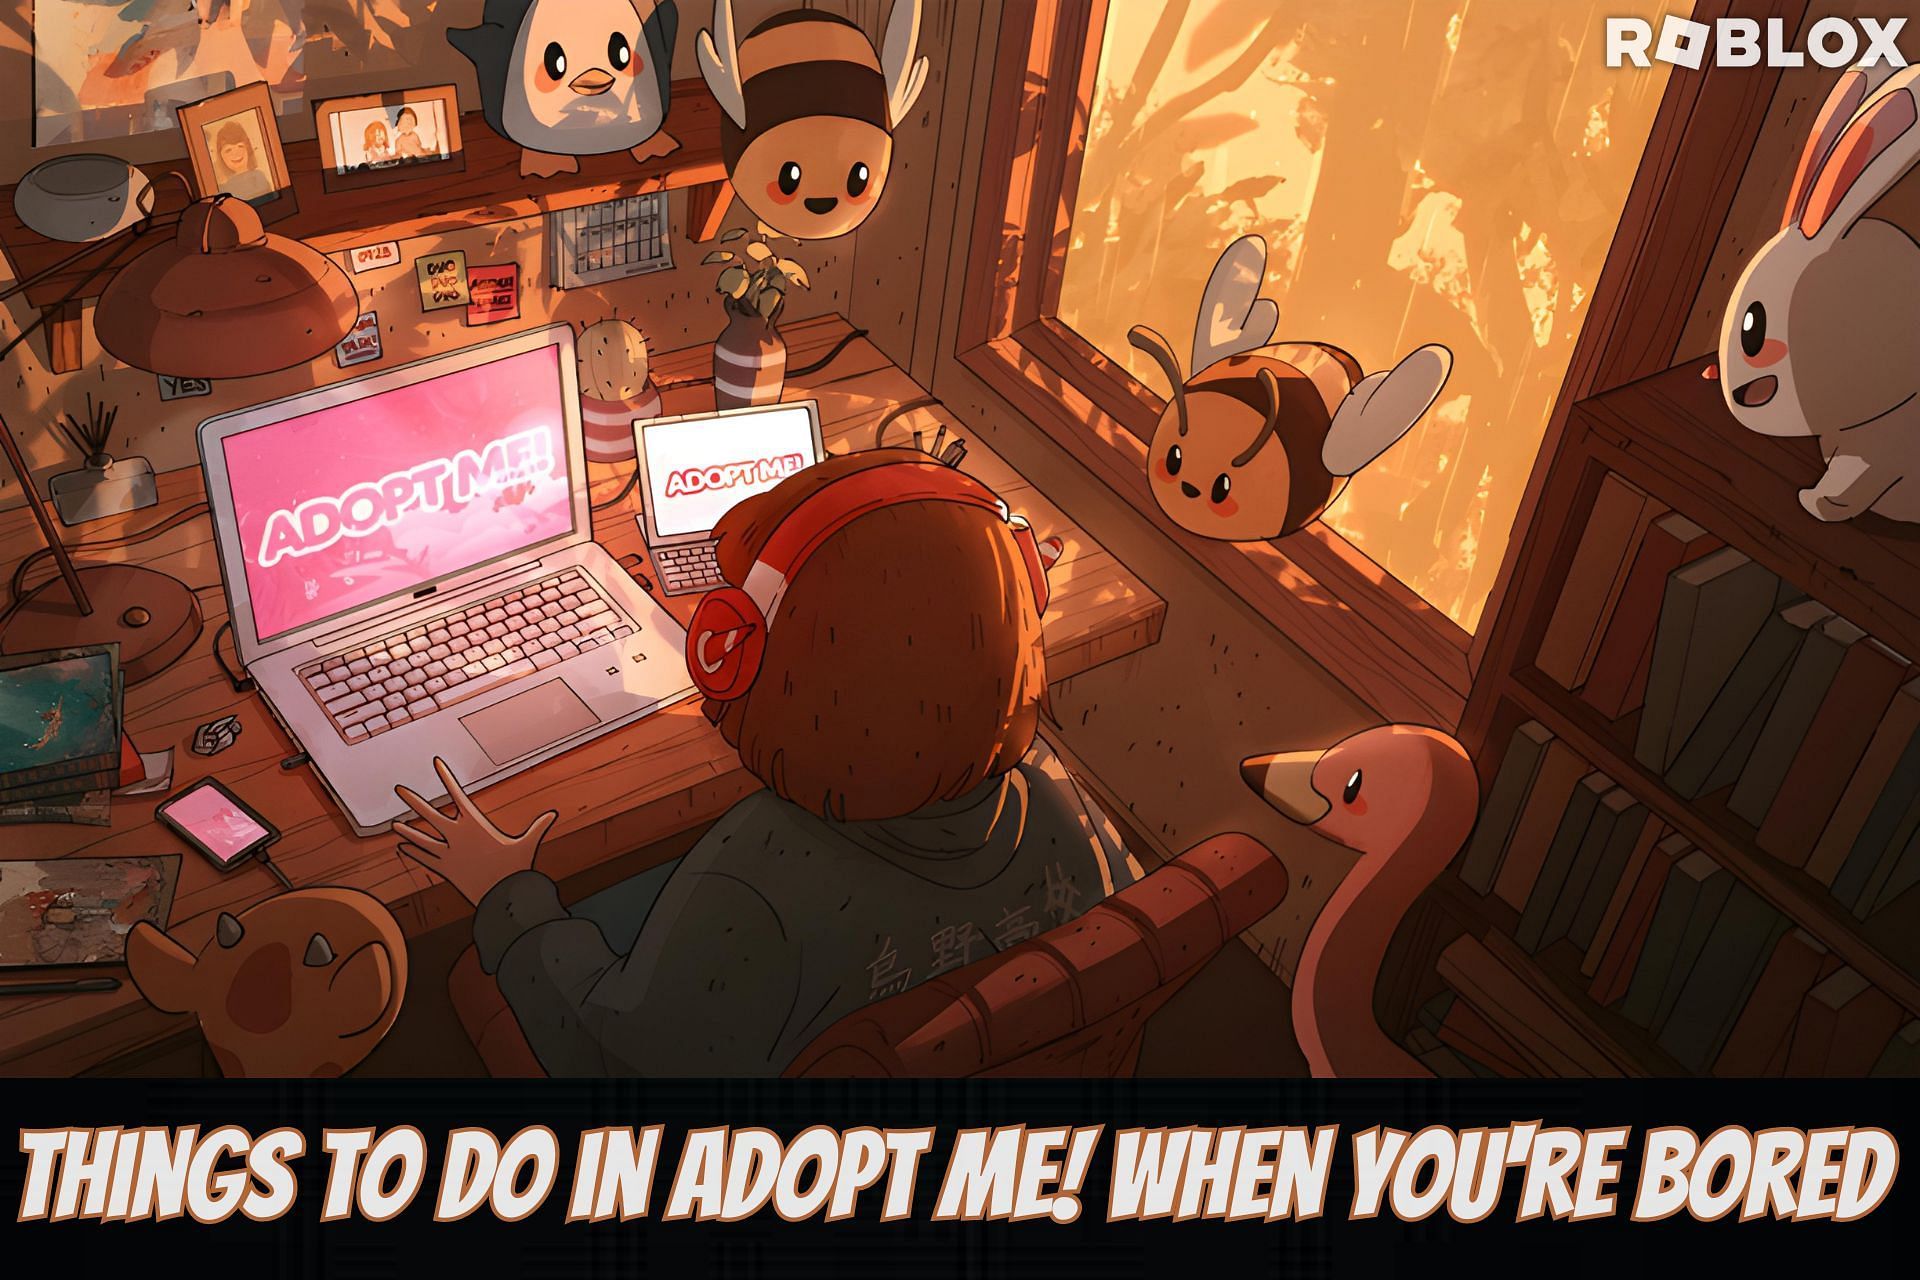 Adopt Me pets — all the latest in-game companions